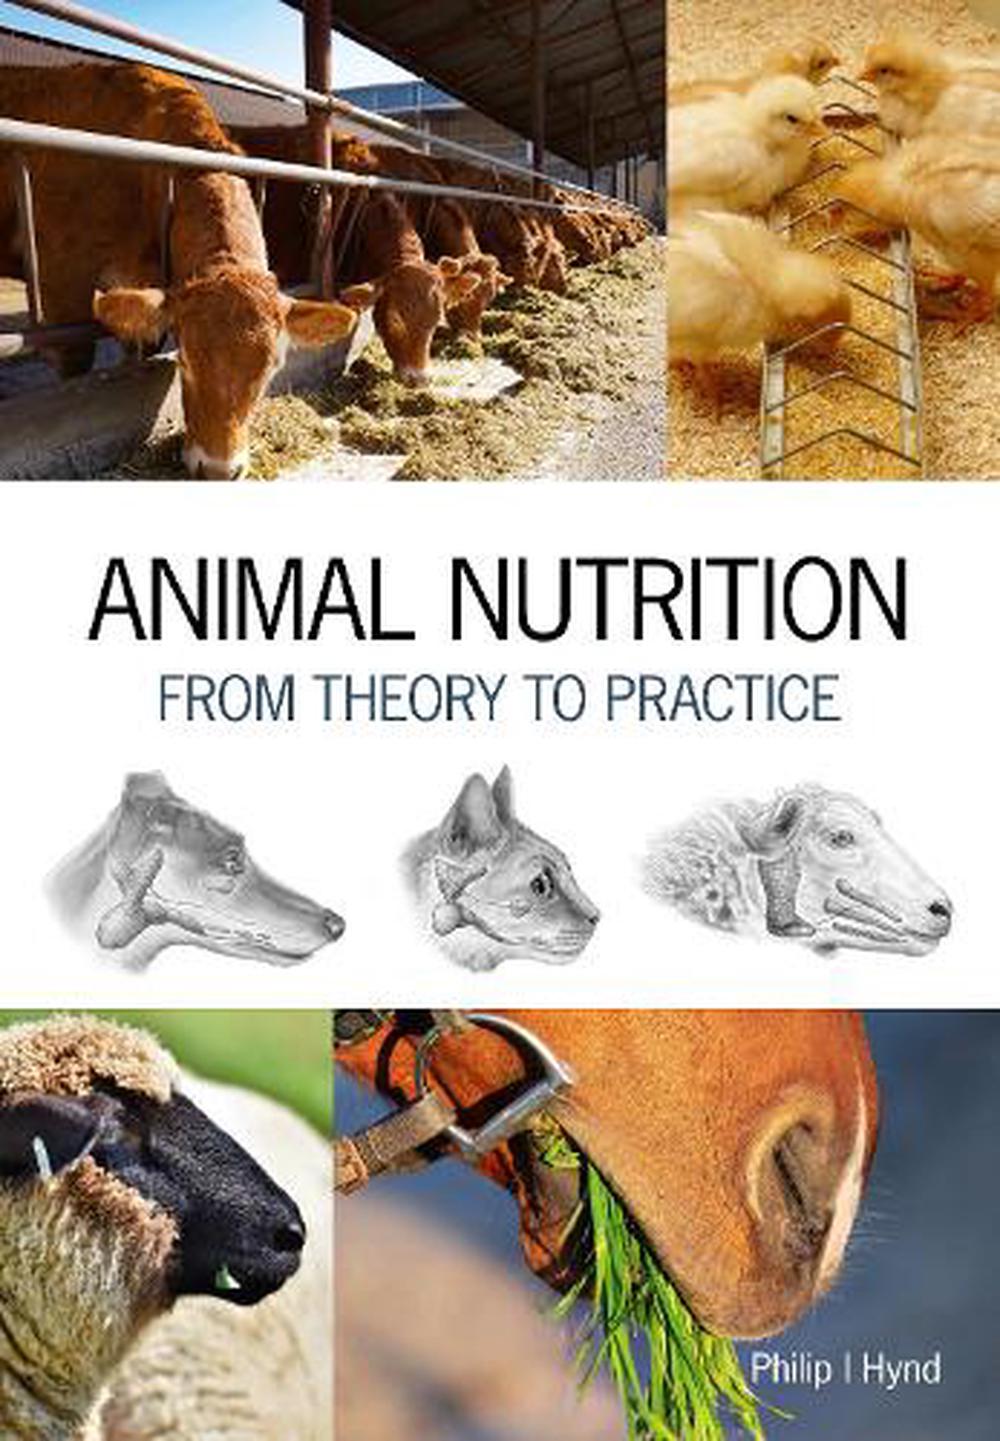 Animal Nutrition: From Theory to Practice by Philip I. Hynd (English